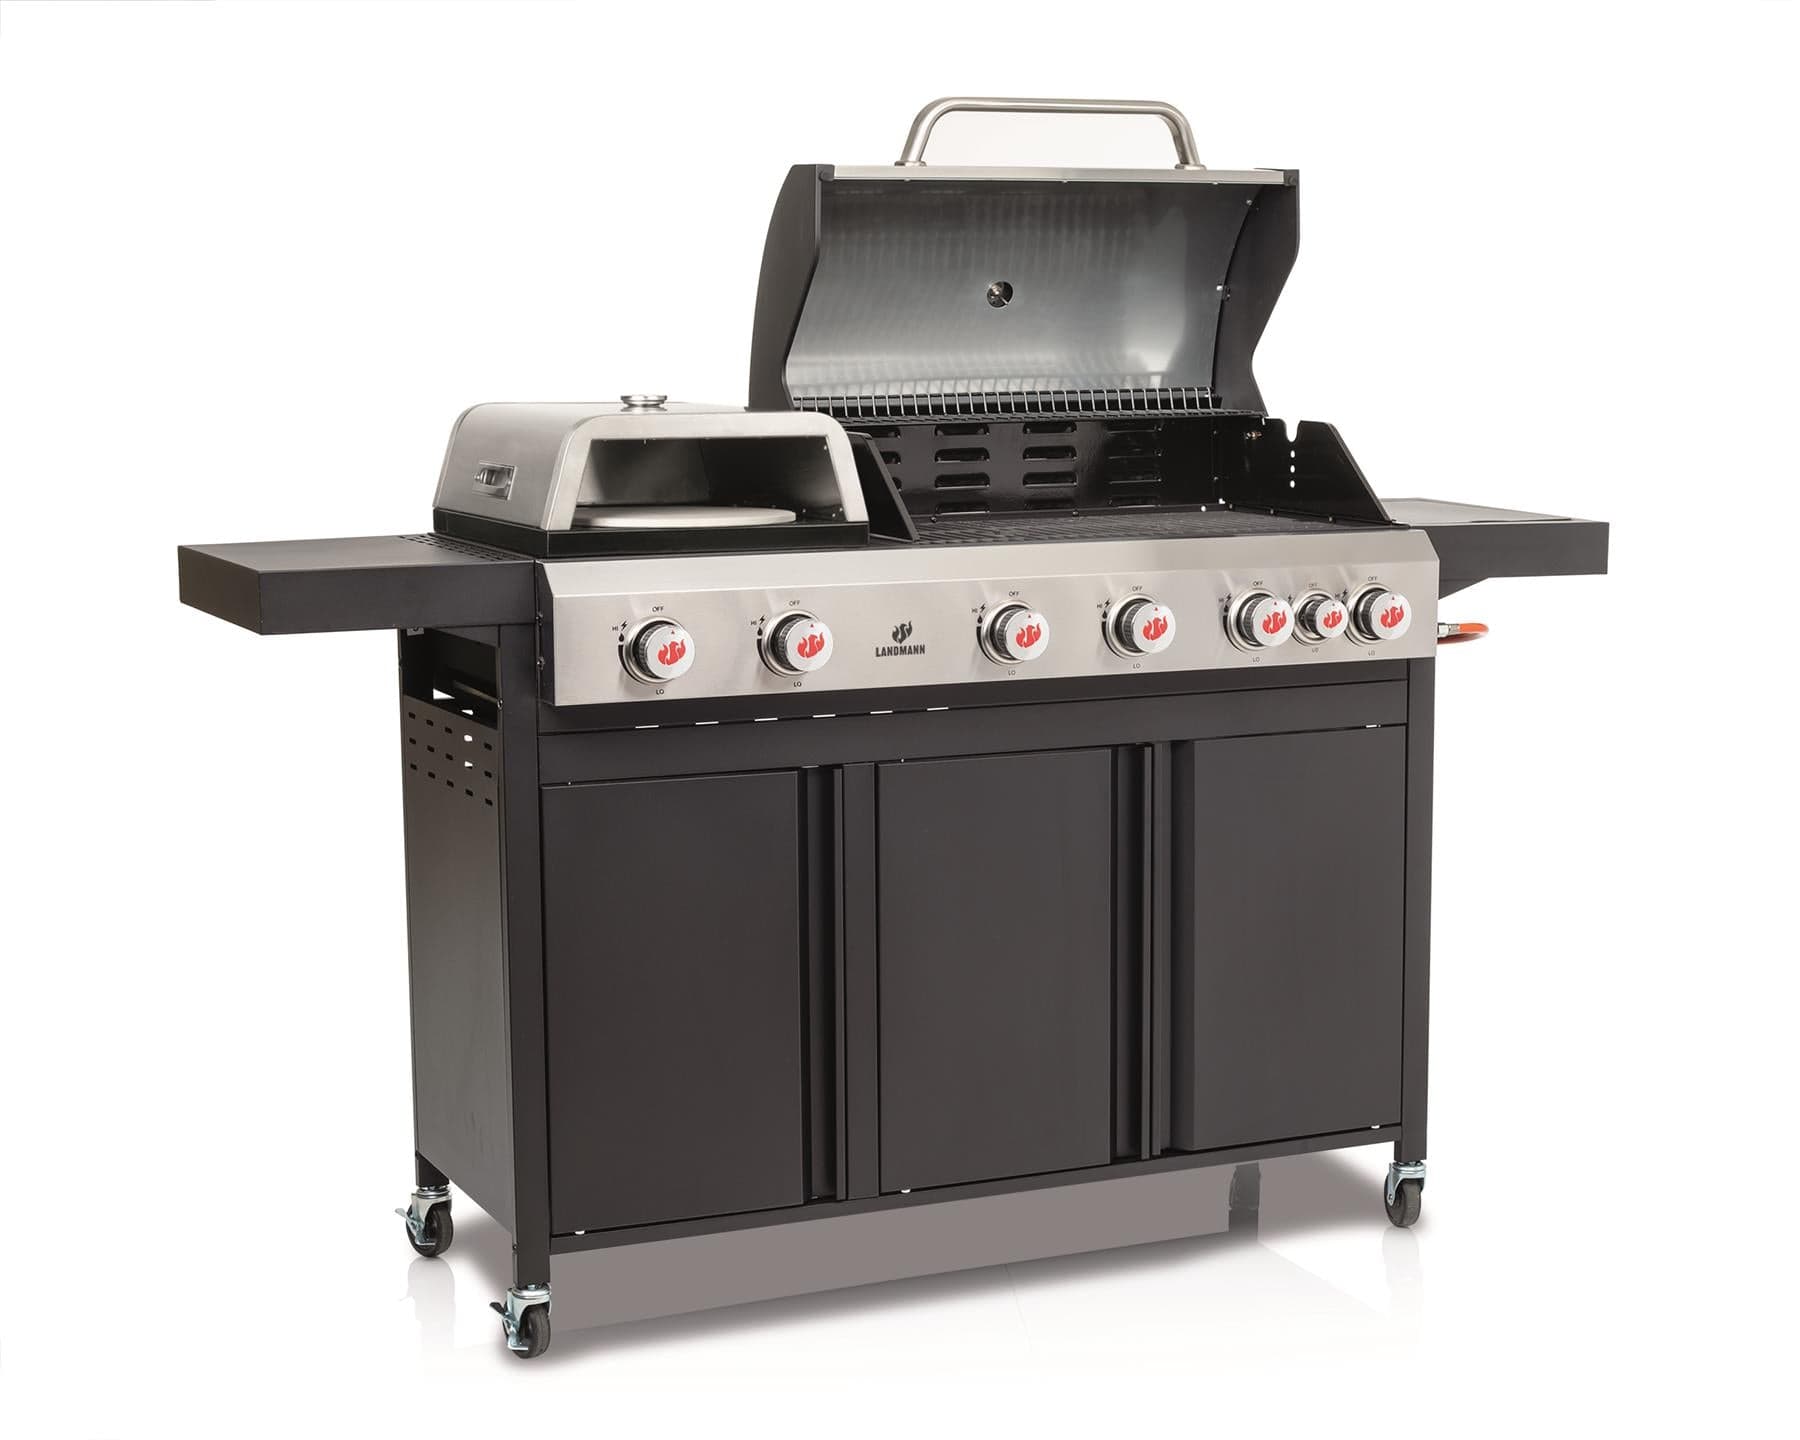 Caliano cooK 6.1 Gas BBQ with Pizza Oven